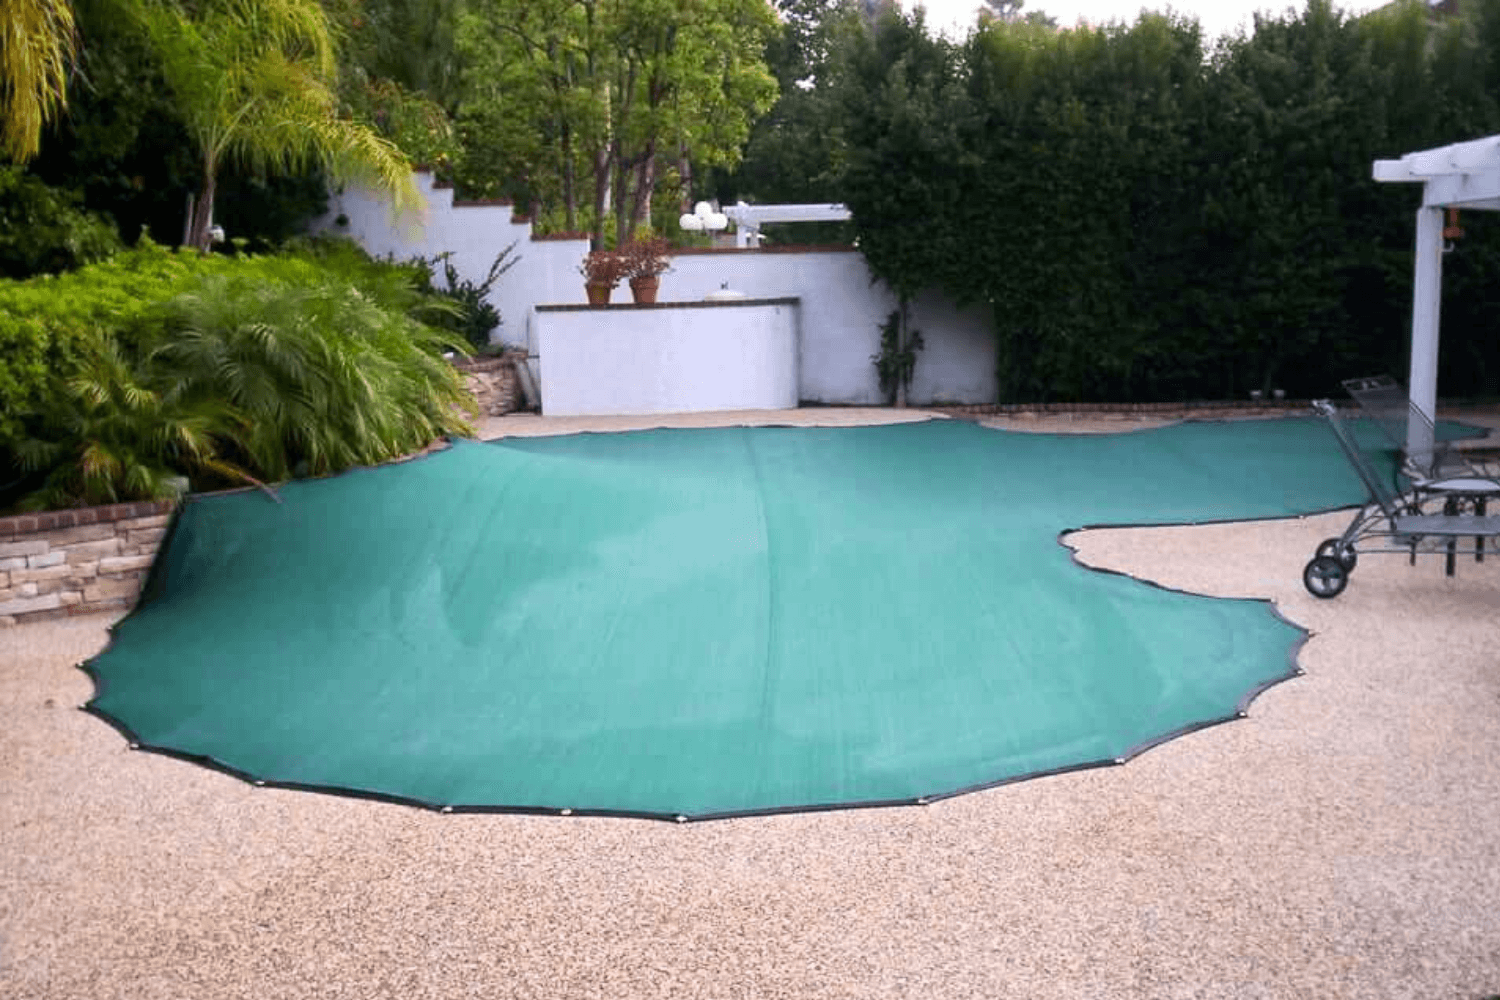 How to choose the best leaf net pool covers